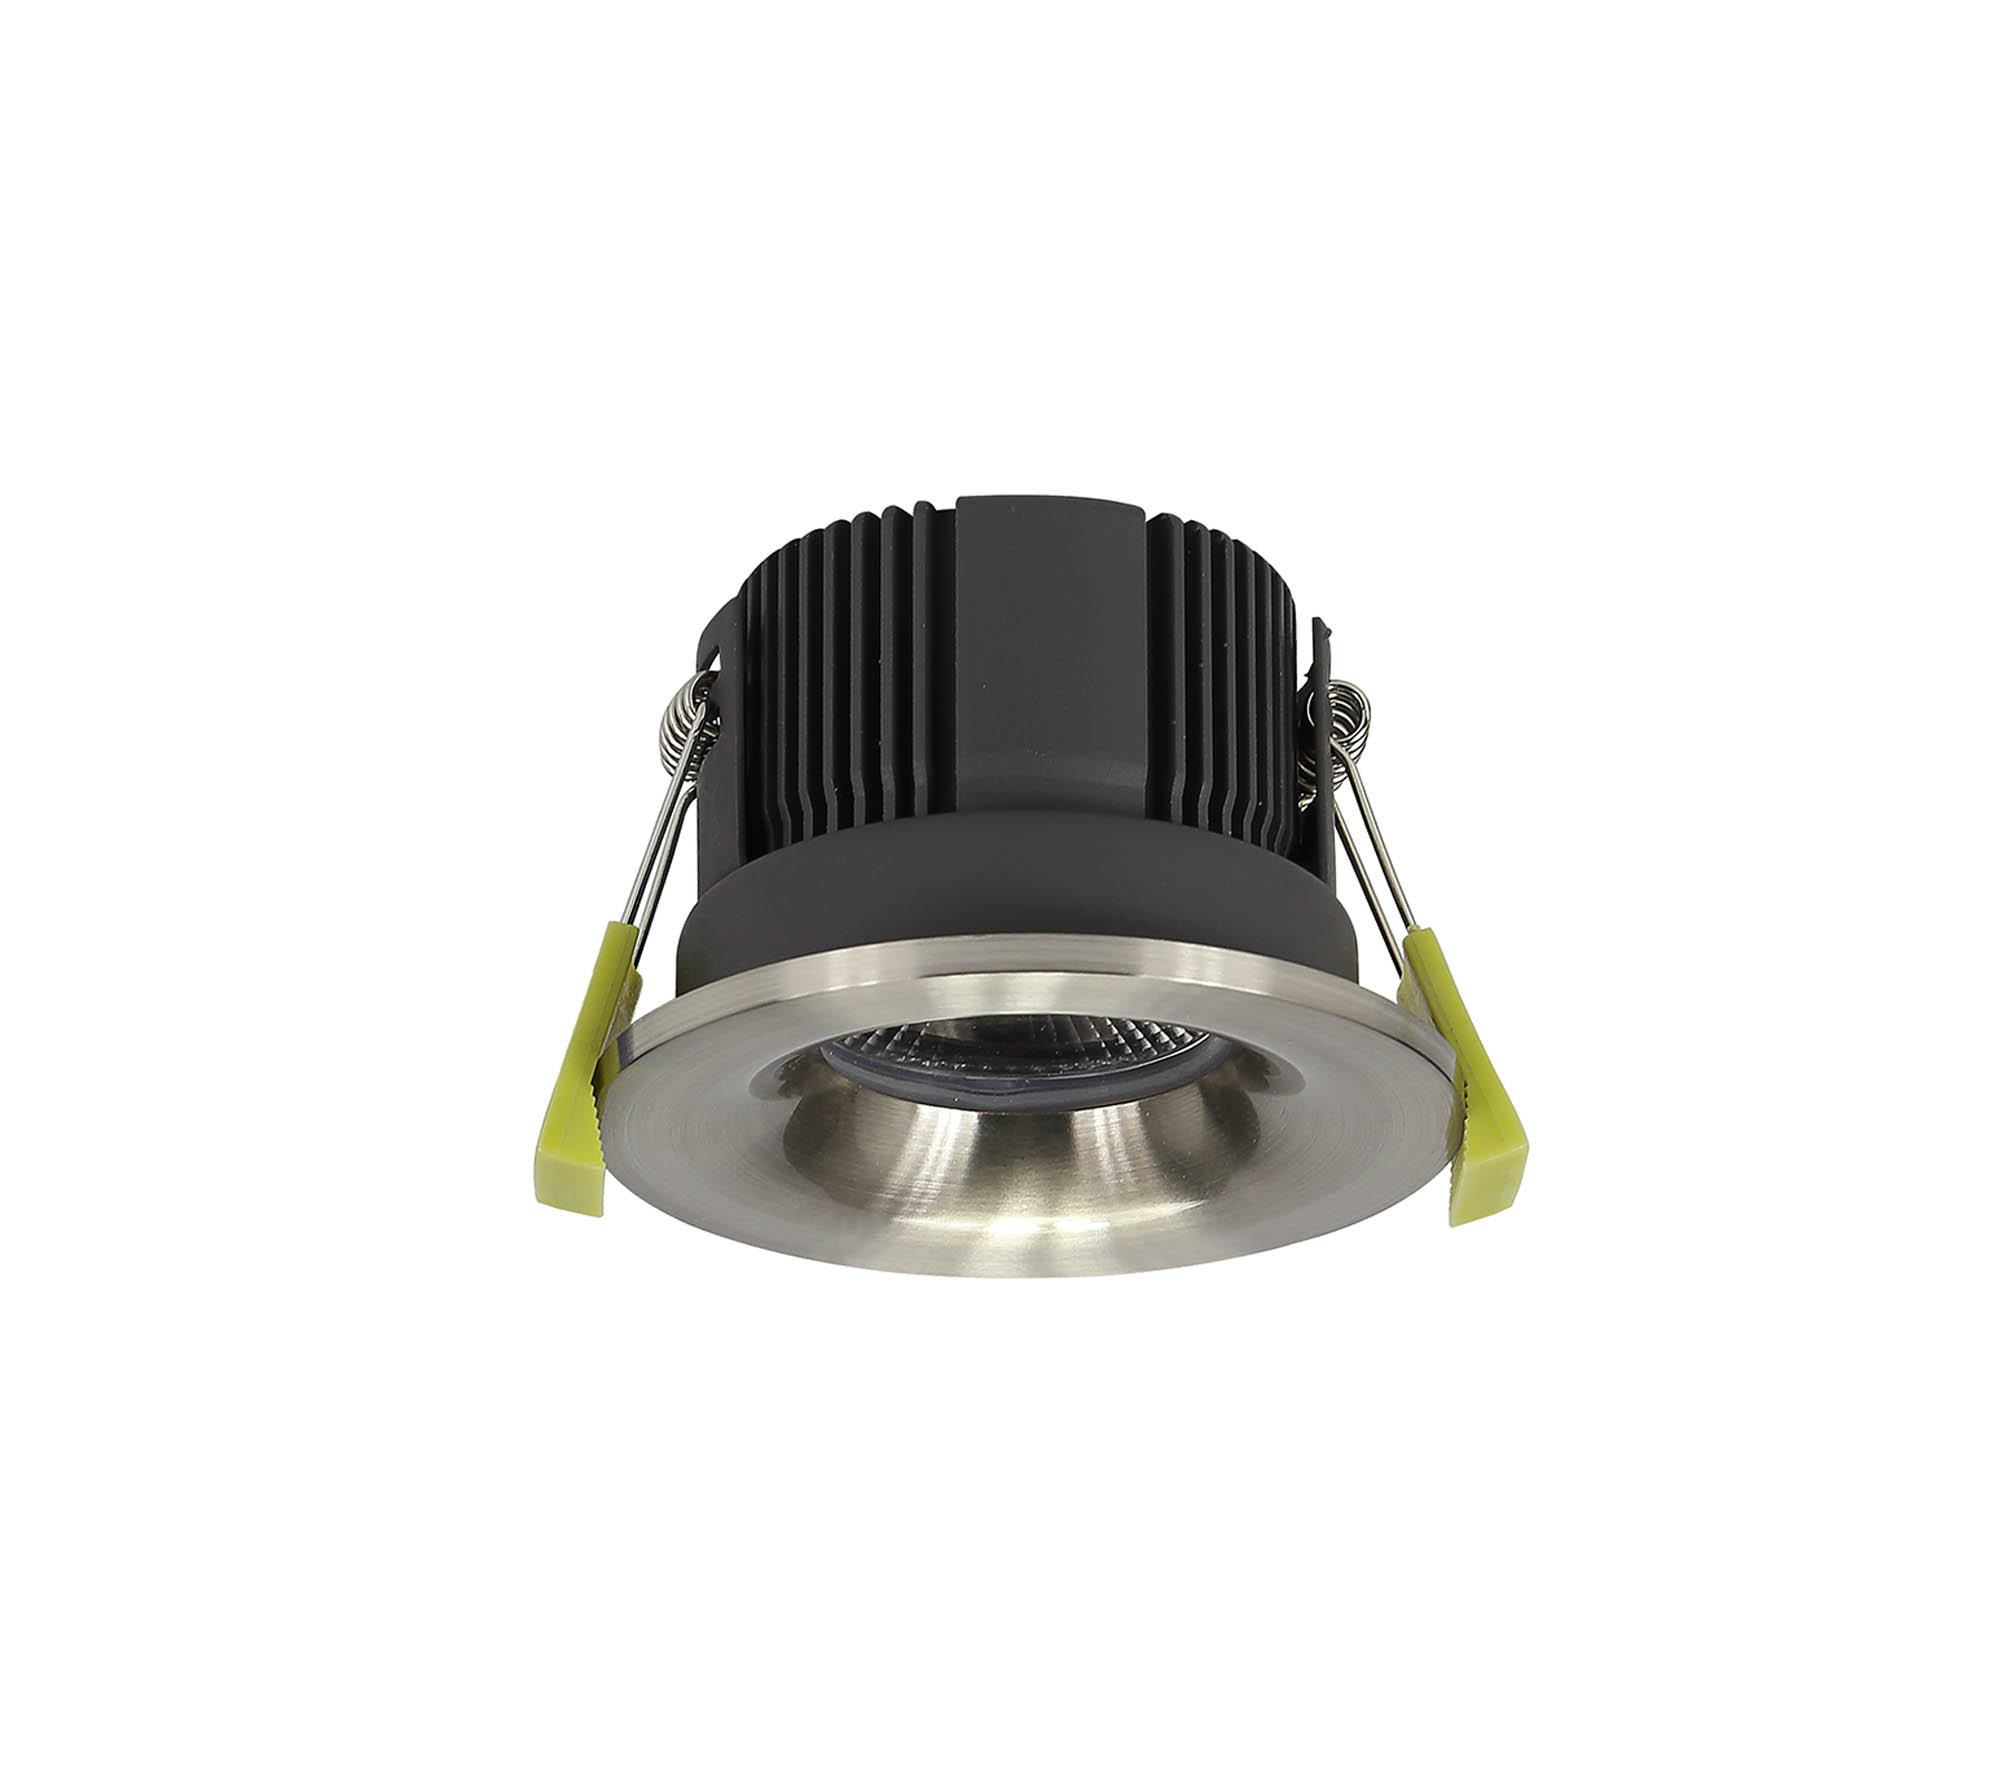 DM200684  Beck 11 FR; 11W; IP65 Satin Nickel LED Recessed Curved Fire Rated Downlight; Cut Out 68mm; 2700K; PLUG IN DRIVER INCLUDED; 3yrs Warranty